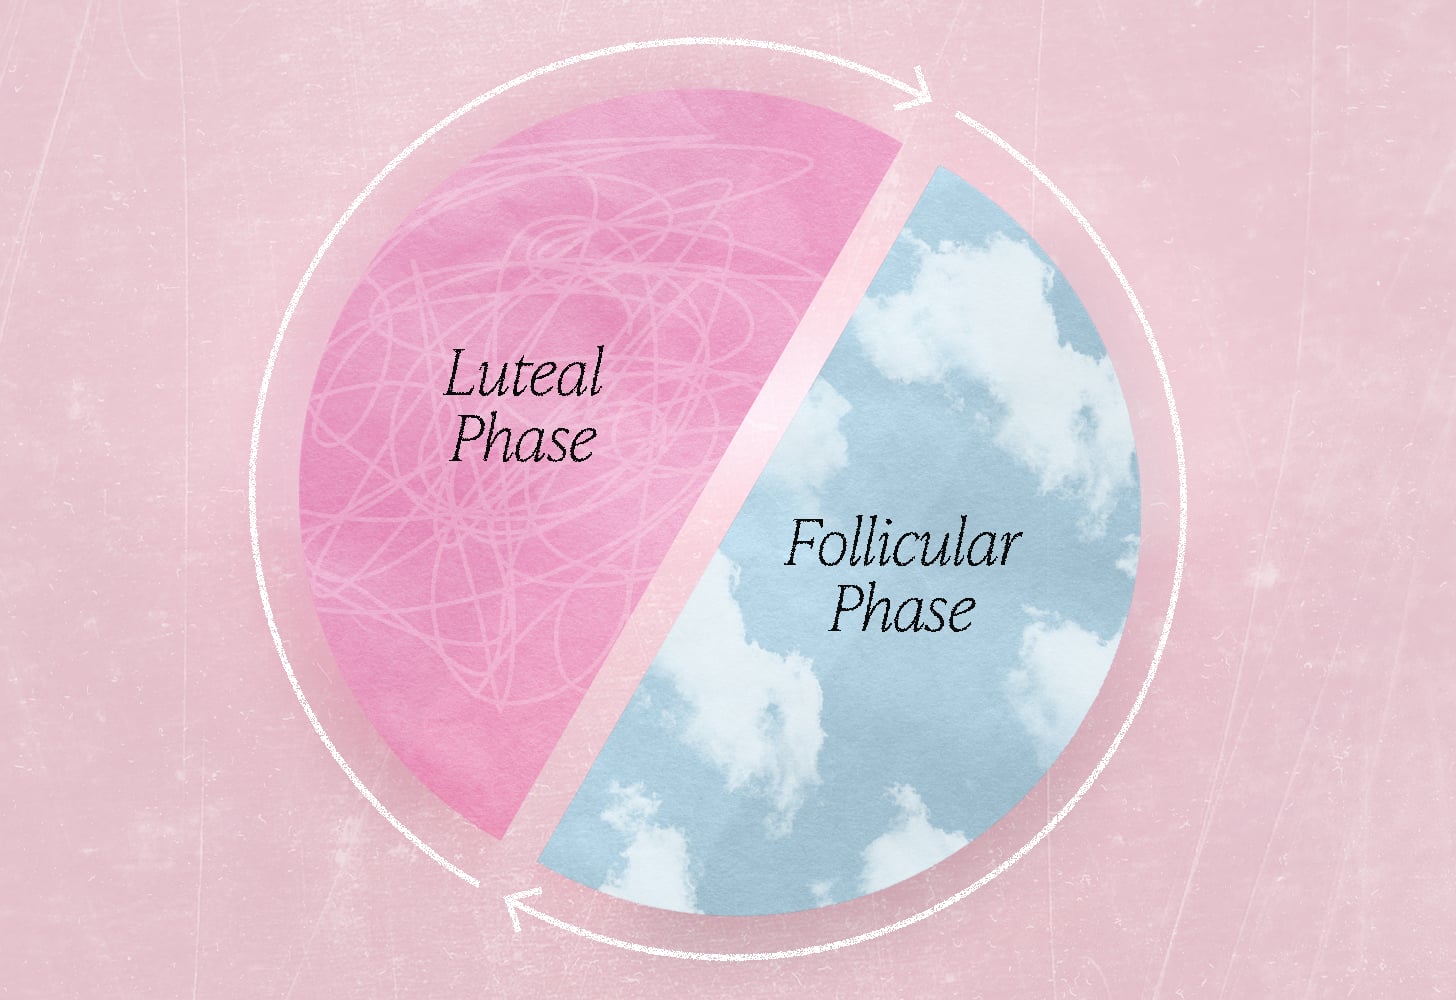 What Is the Luteal Phase and How Does It Make You Feel?